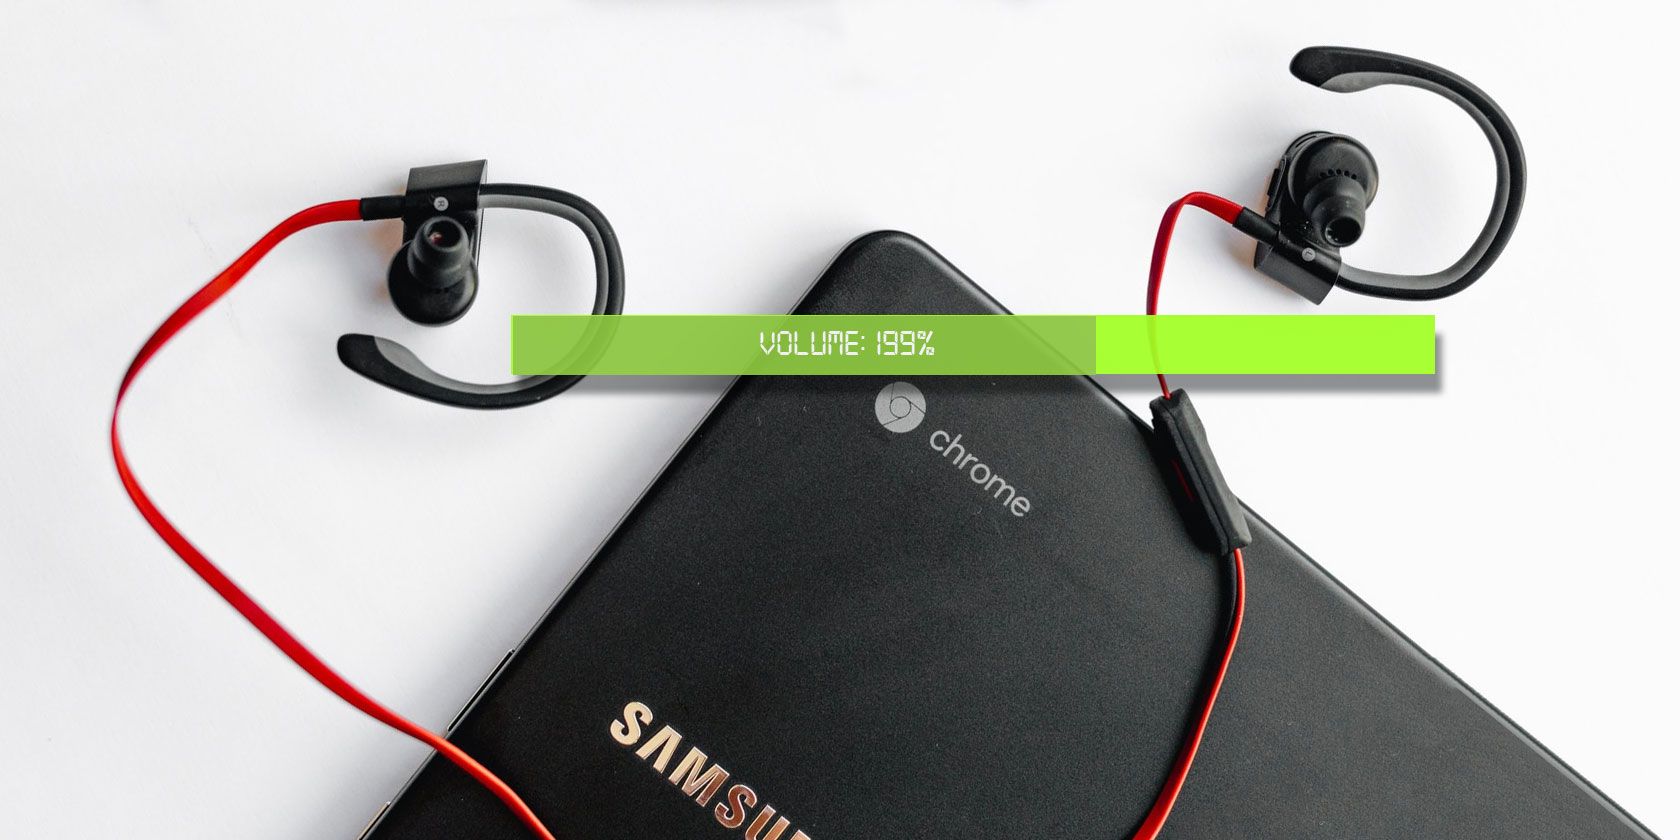 A pair of earphones lies on top of a closed chromebook with an illustration of a volume bar superimposed